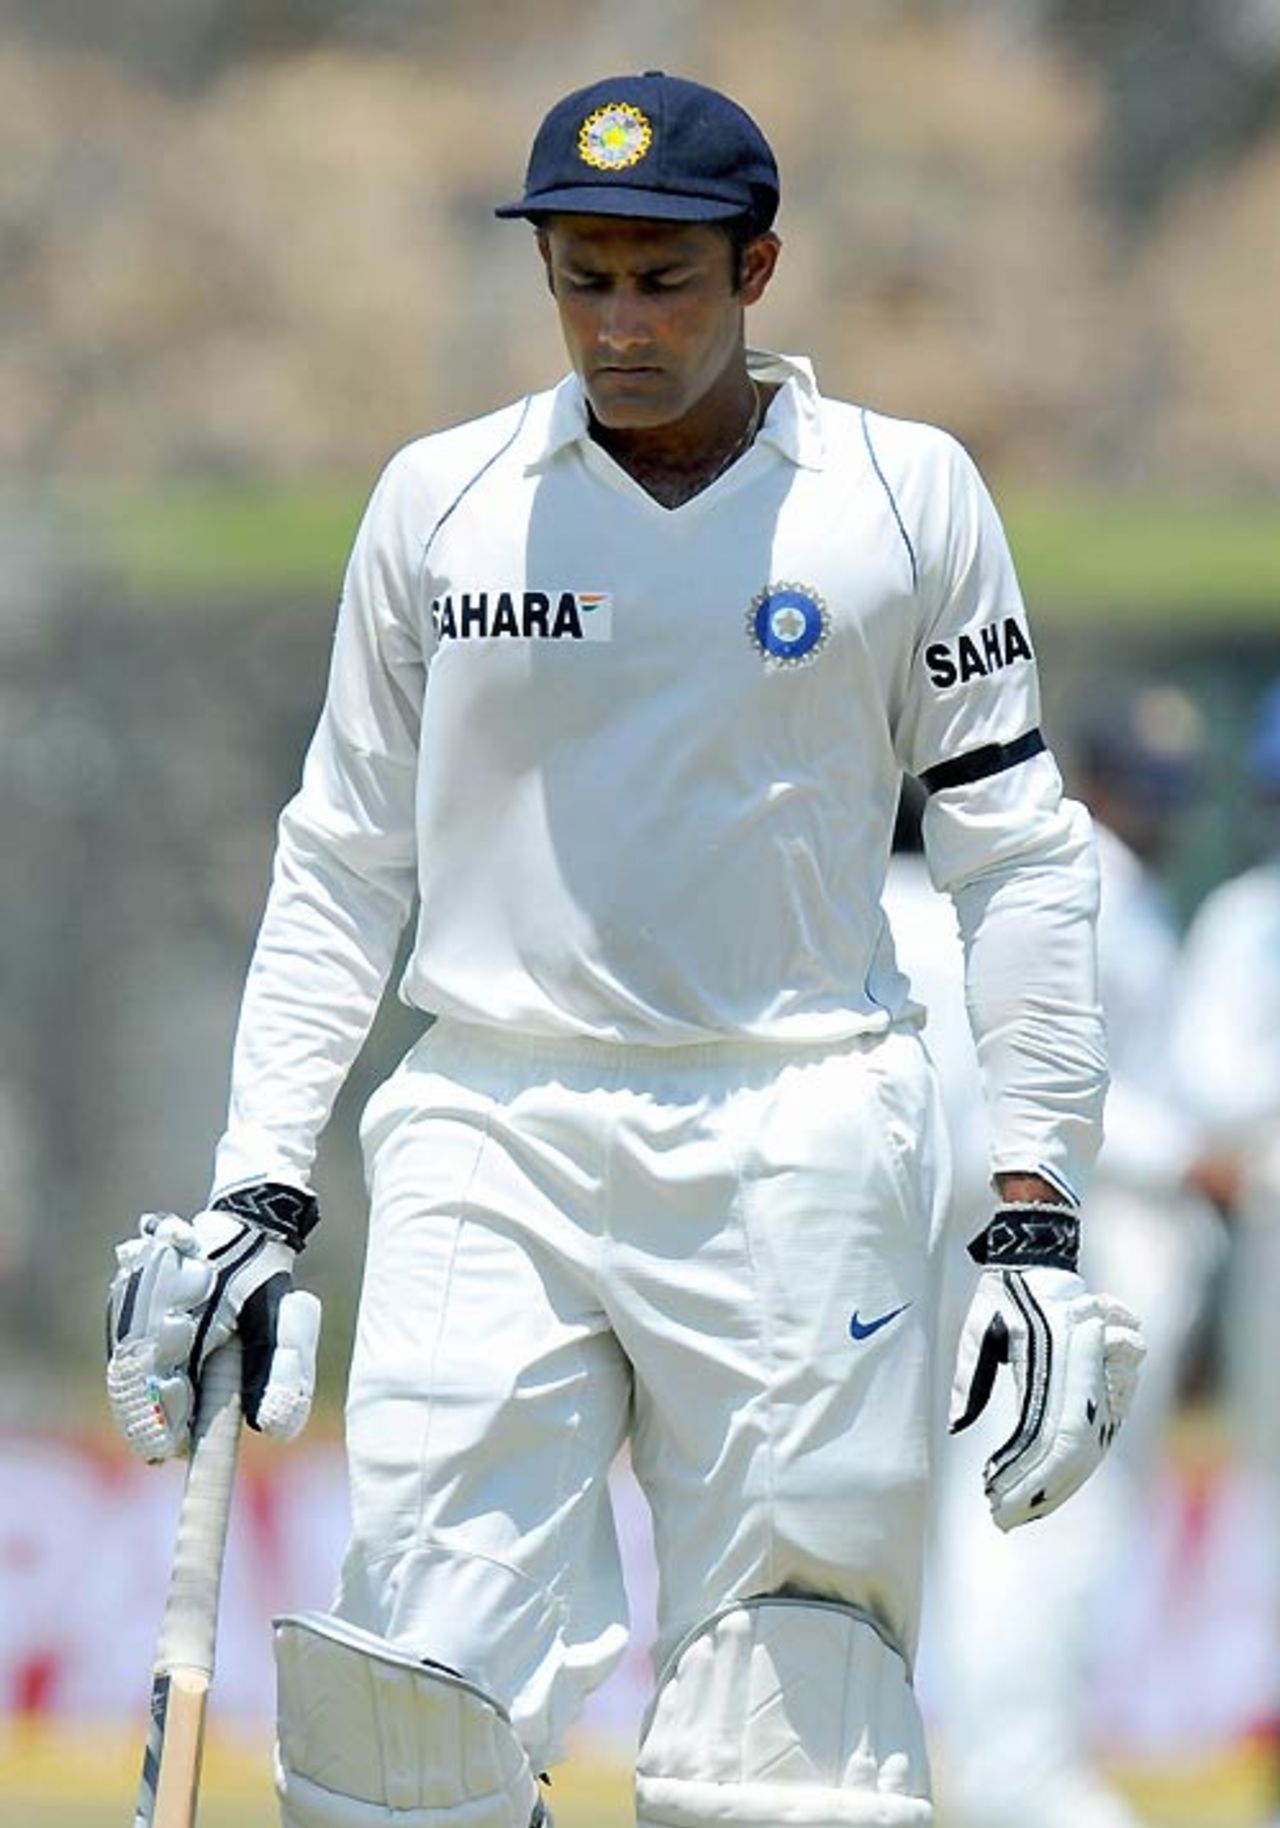 Anil Kumble walks back after being stumped for 4, Sri Lanka v India, 2nd Test, Galle, 2nd day, August 1, 2008